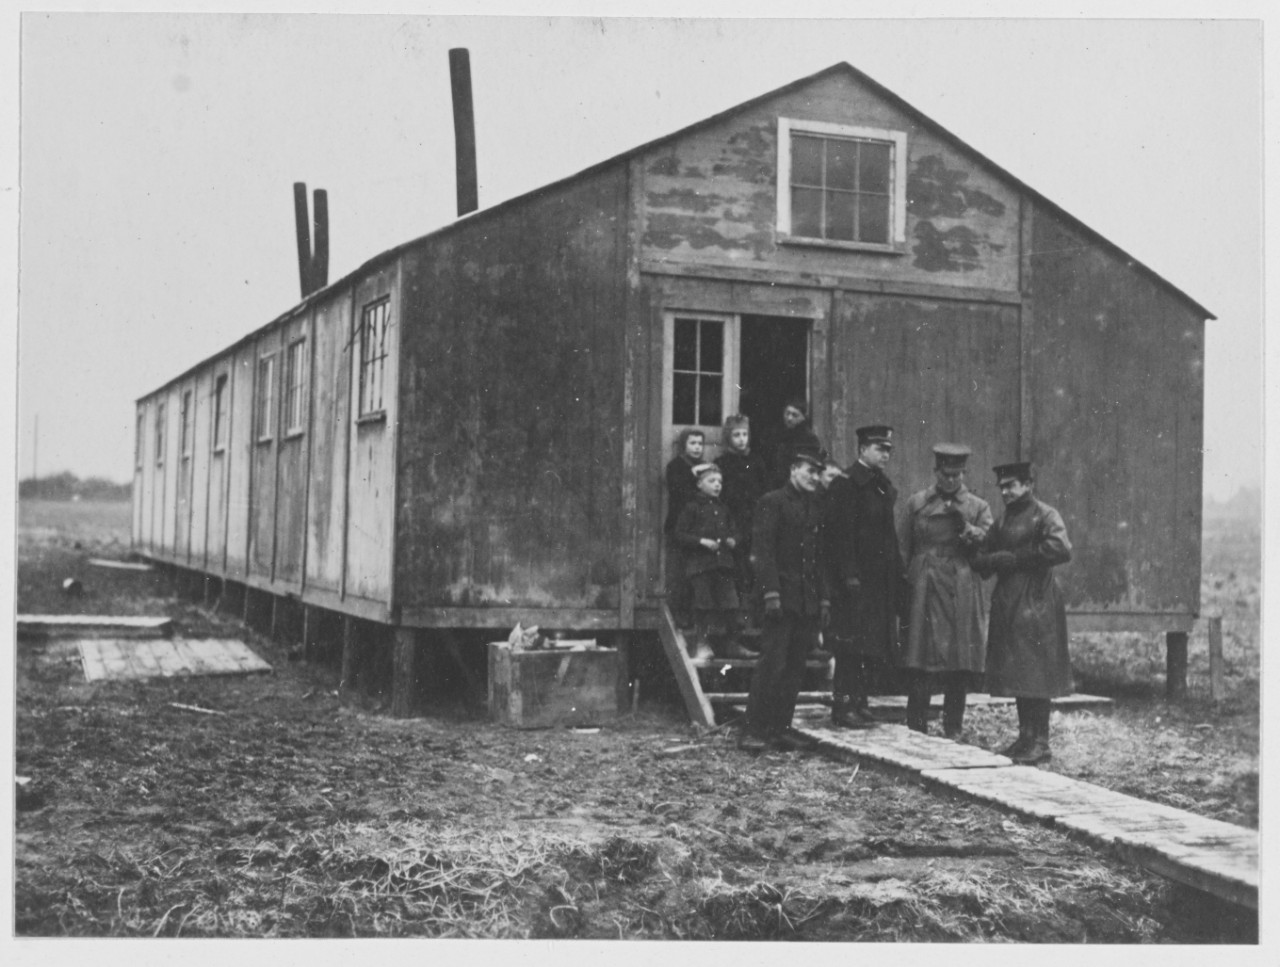 Navy Hospital for Refugees in relief work near Lille, France during World War I.